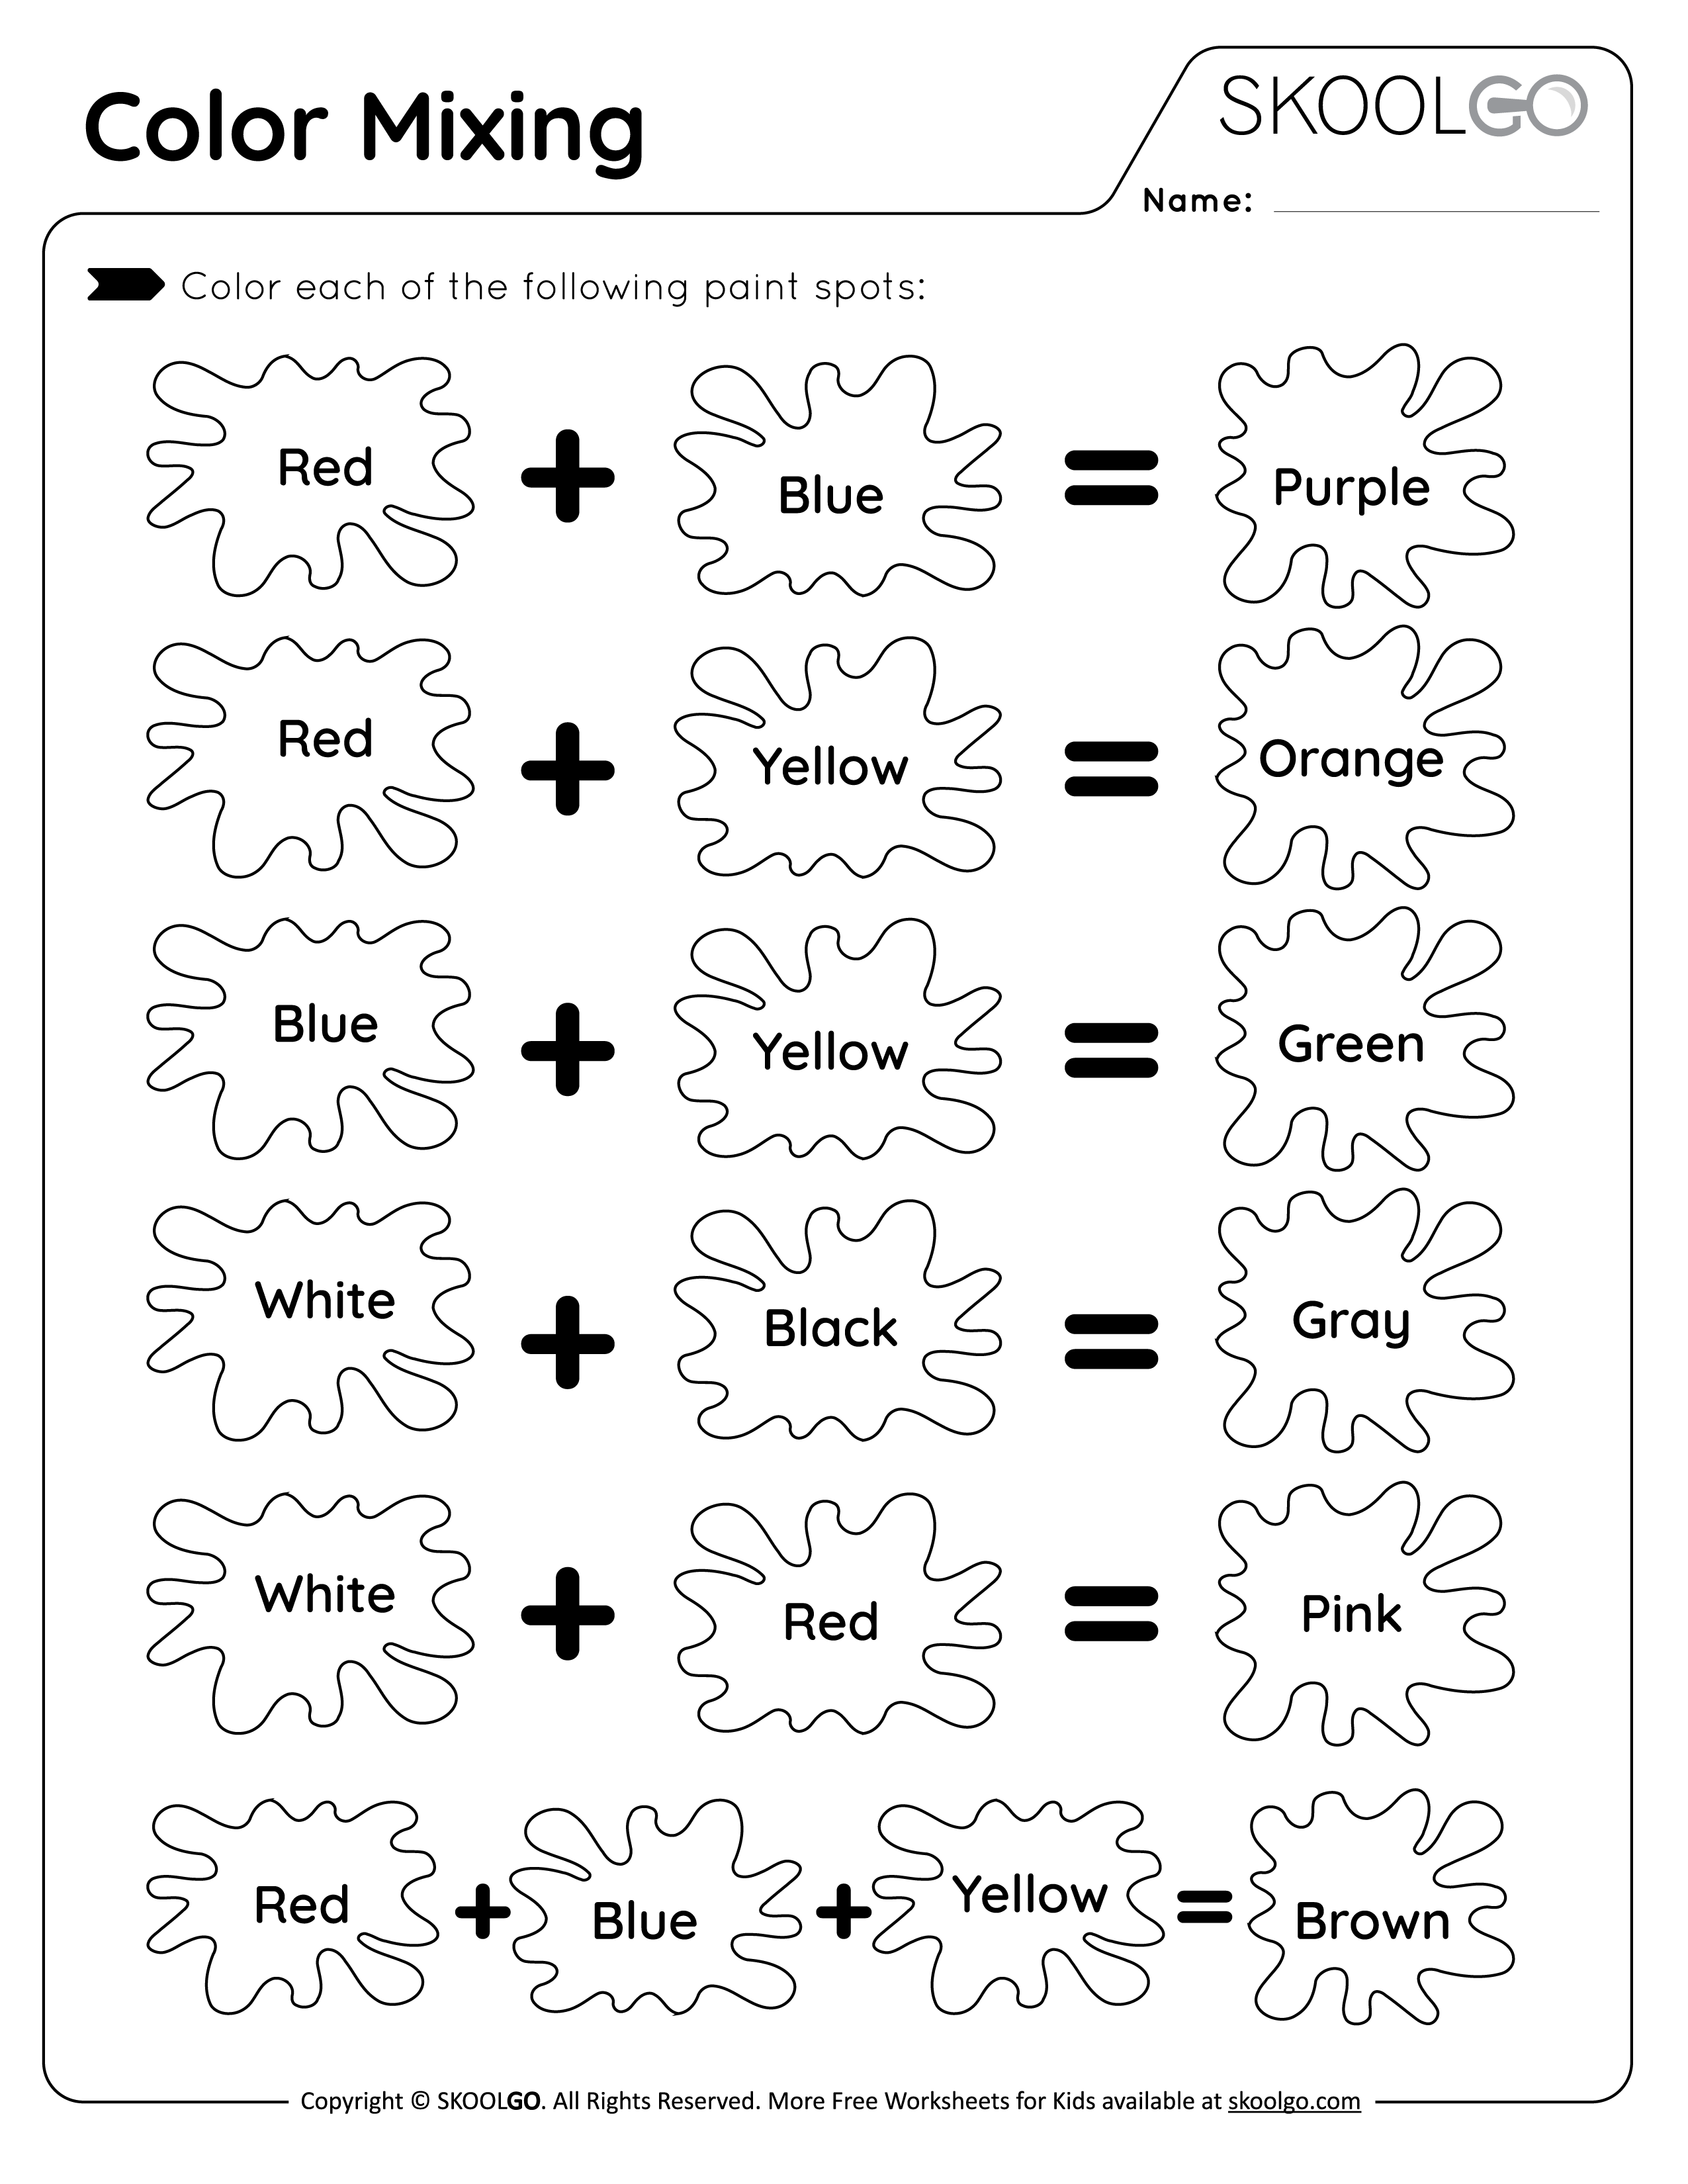 Color Mixing - Free Worksheet for Kids - Black and White